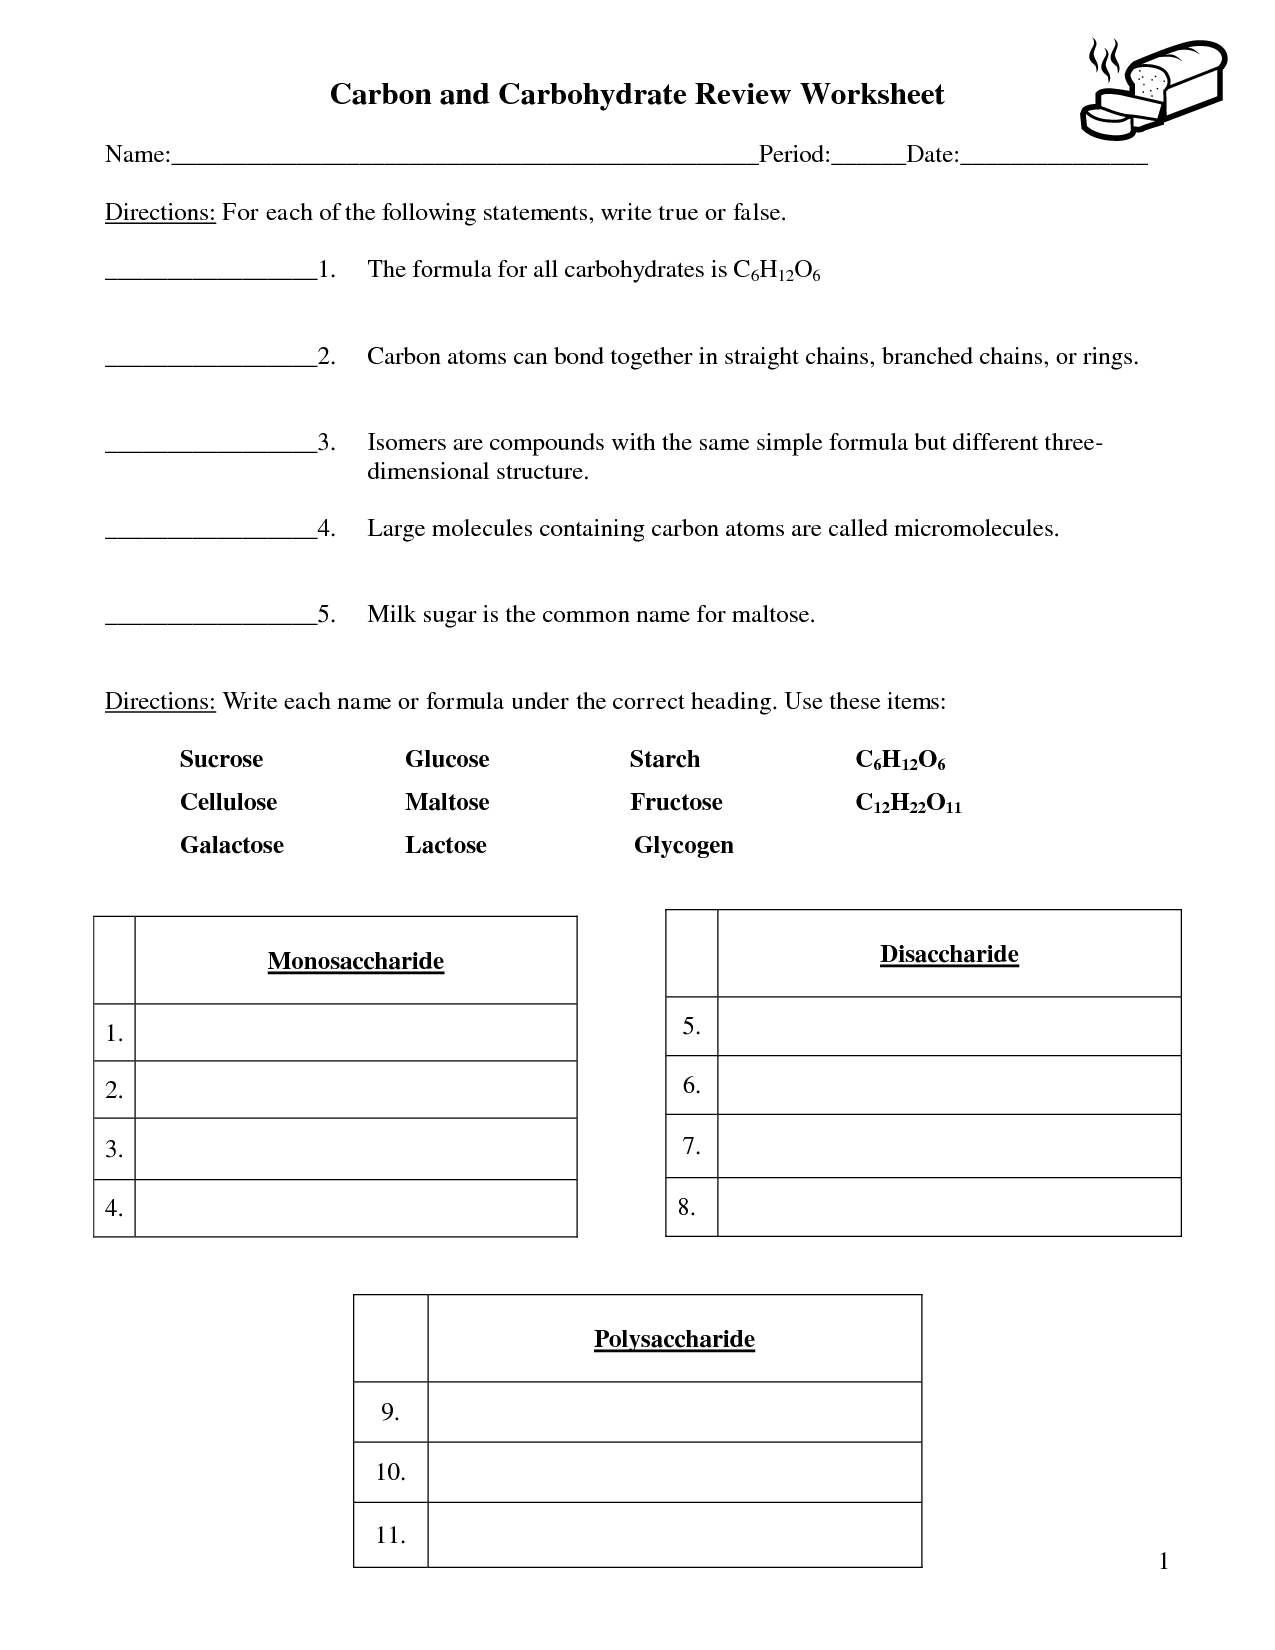 16-best-images-of-carbohydrate-review-worksheet-carbohydrates-review-worksheet-macromolecules